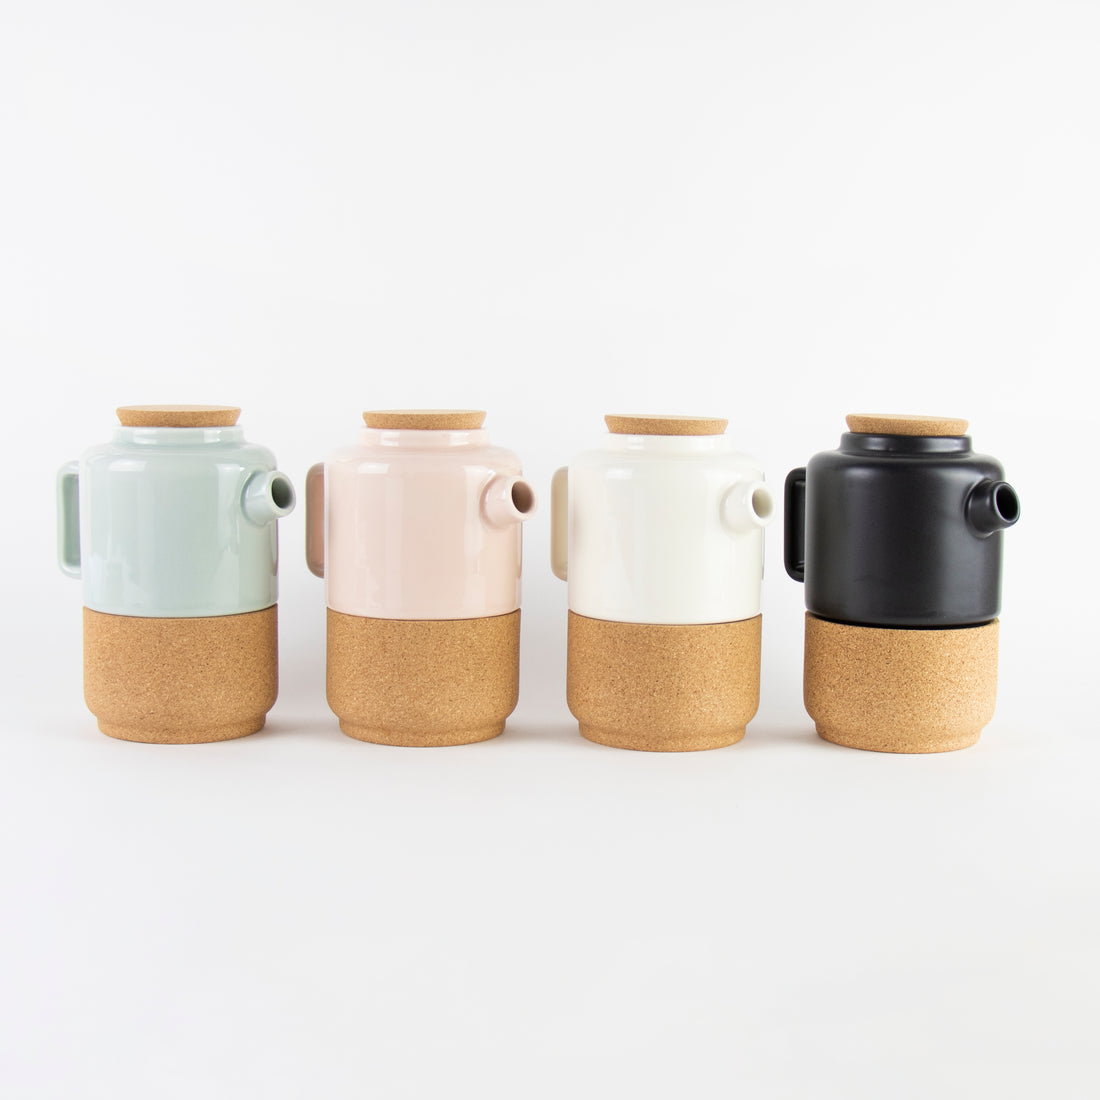 Sustainable ceramic and cork teapot in All Colours